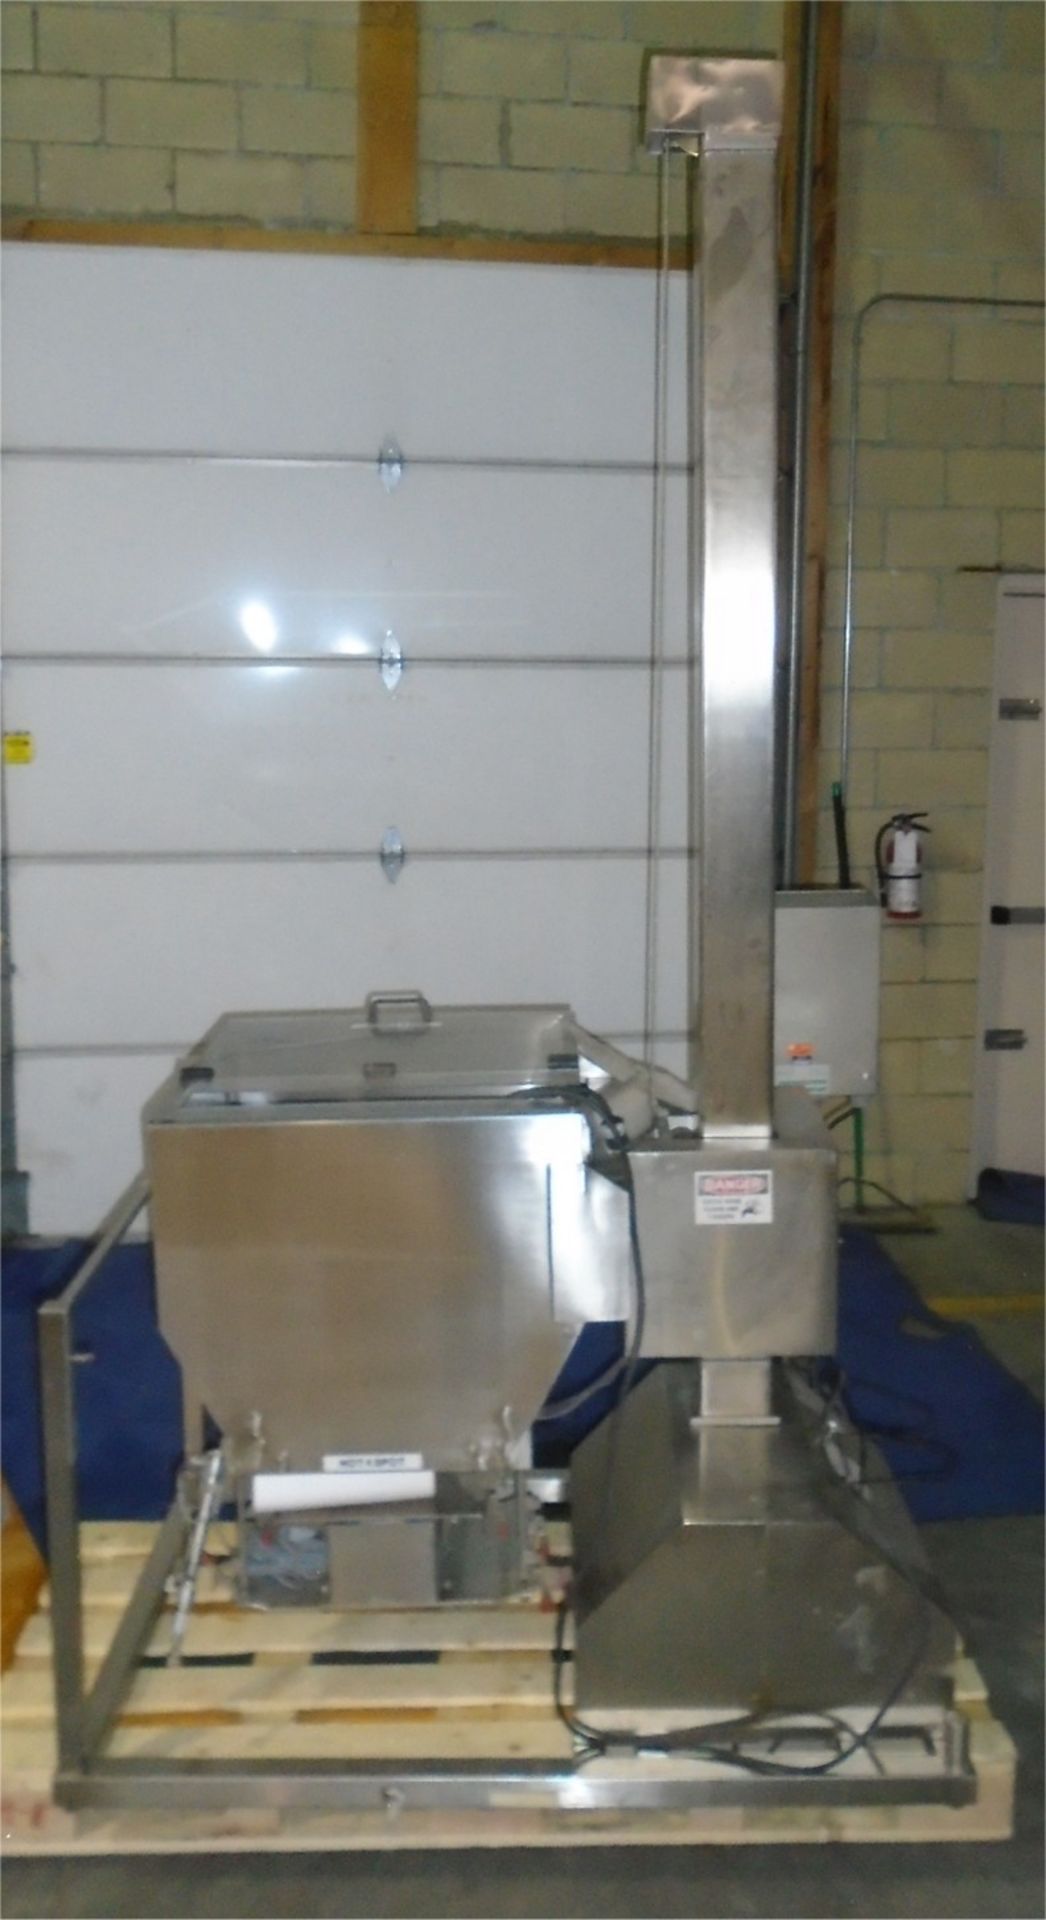 Used CLI tablet Elevator Feeder model TE4-S006. Serial #429981D. Features: max discharge height 78”, - Image 2 of 4